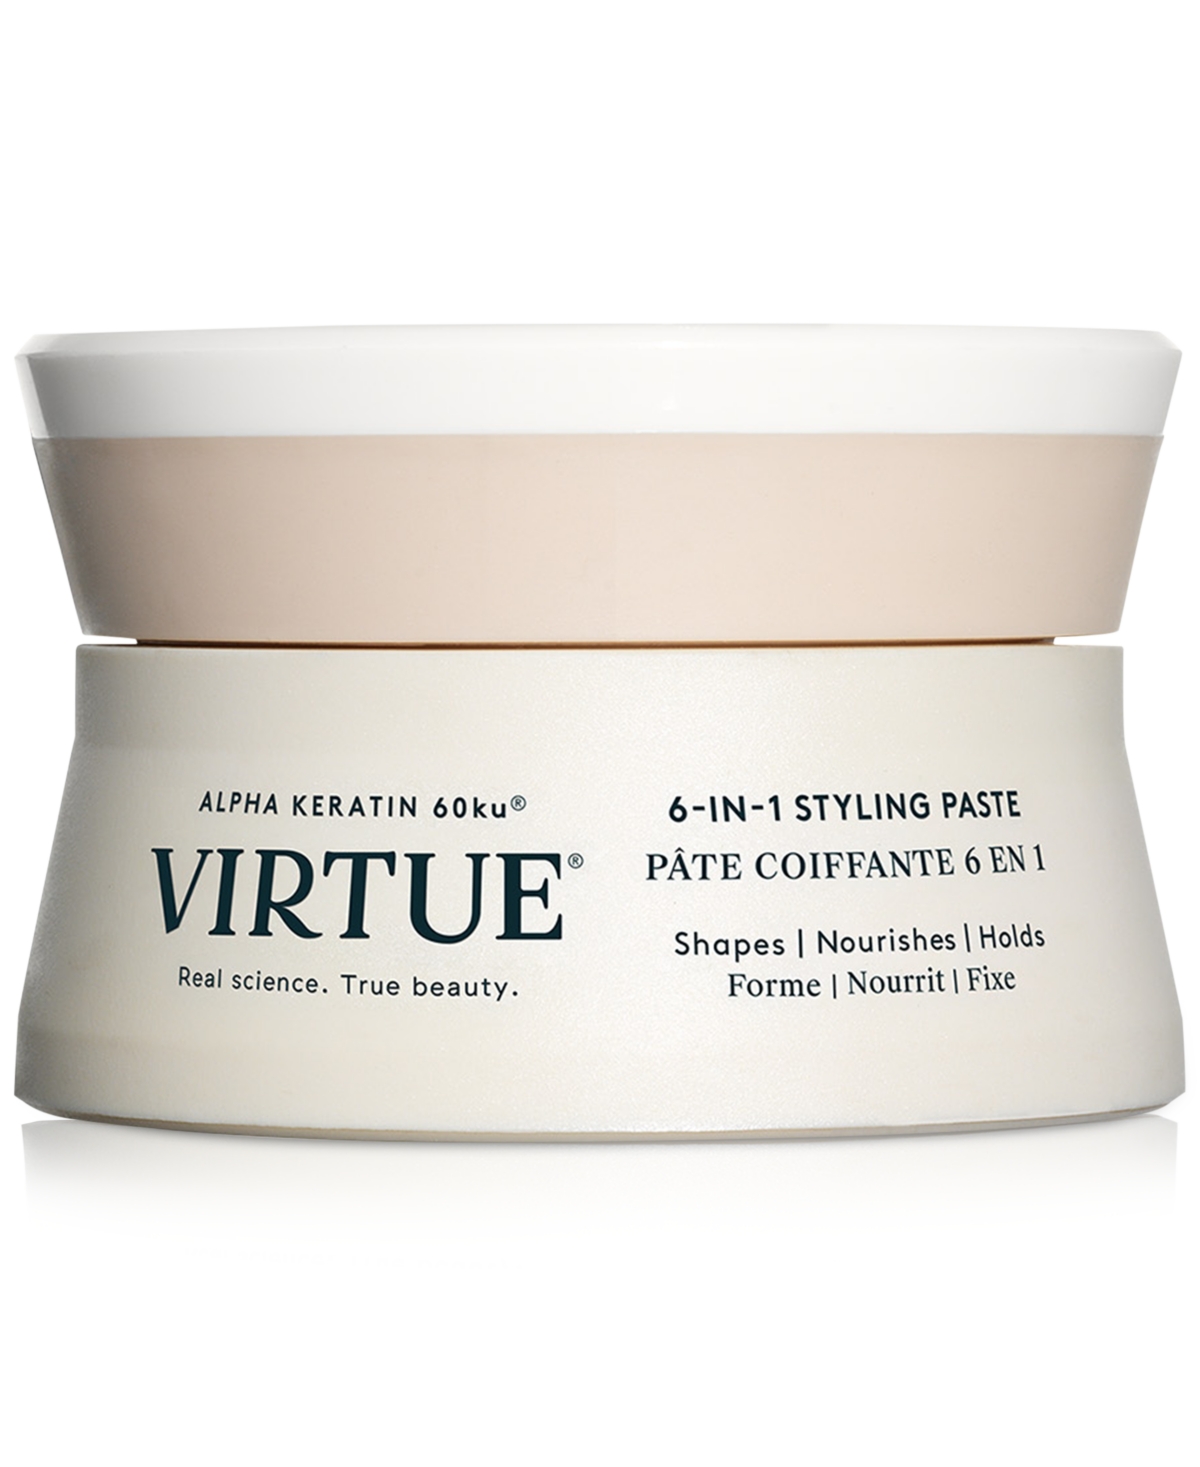 6-In-1 Styling Paste, 1.7 oz.